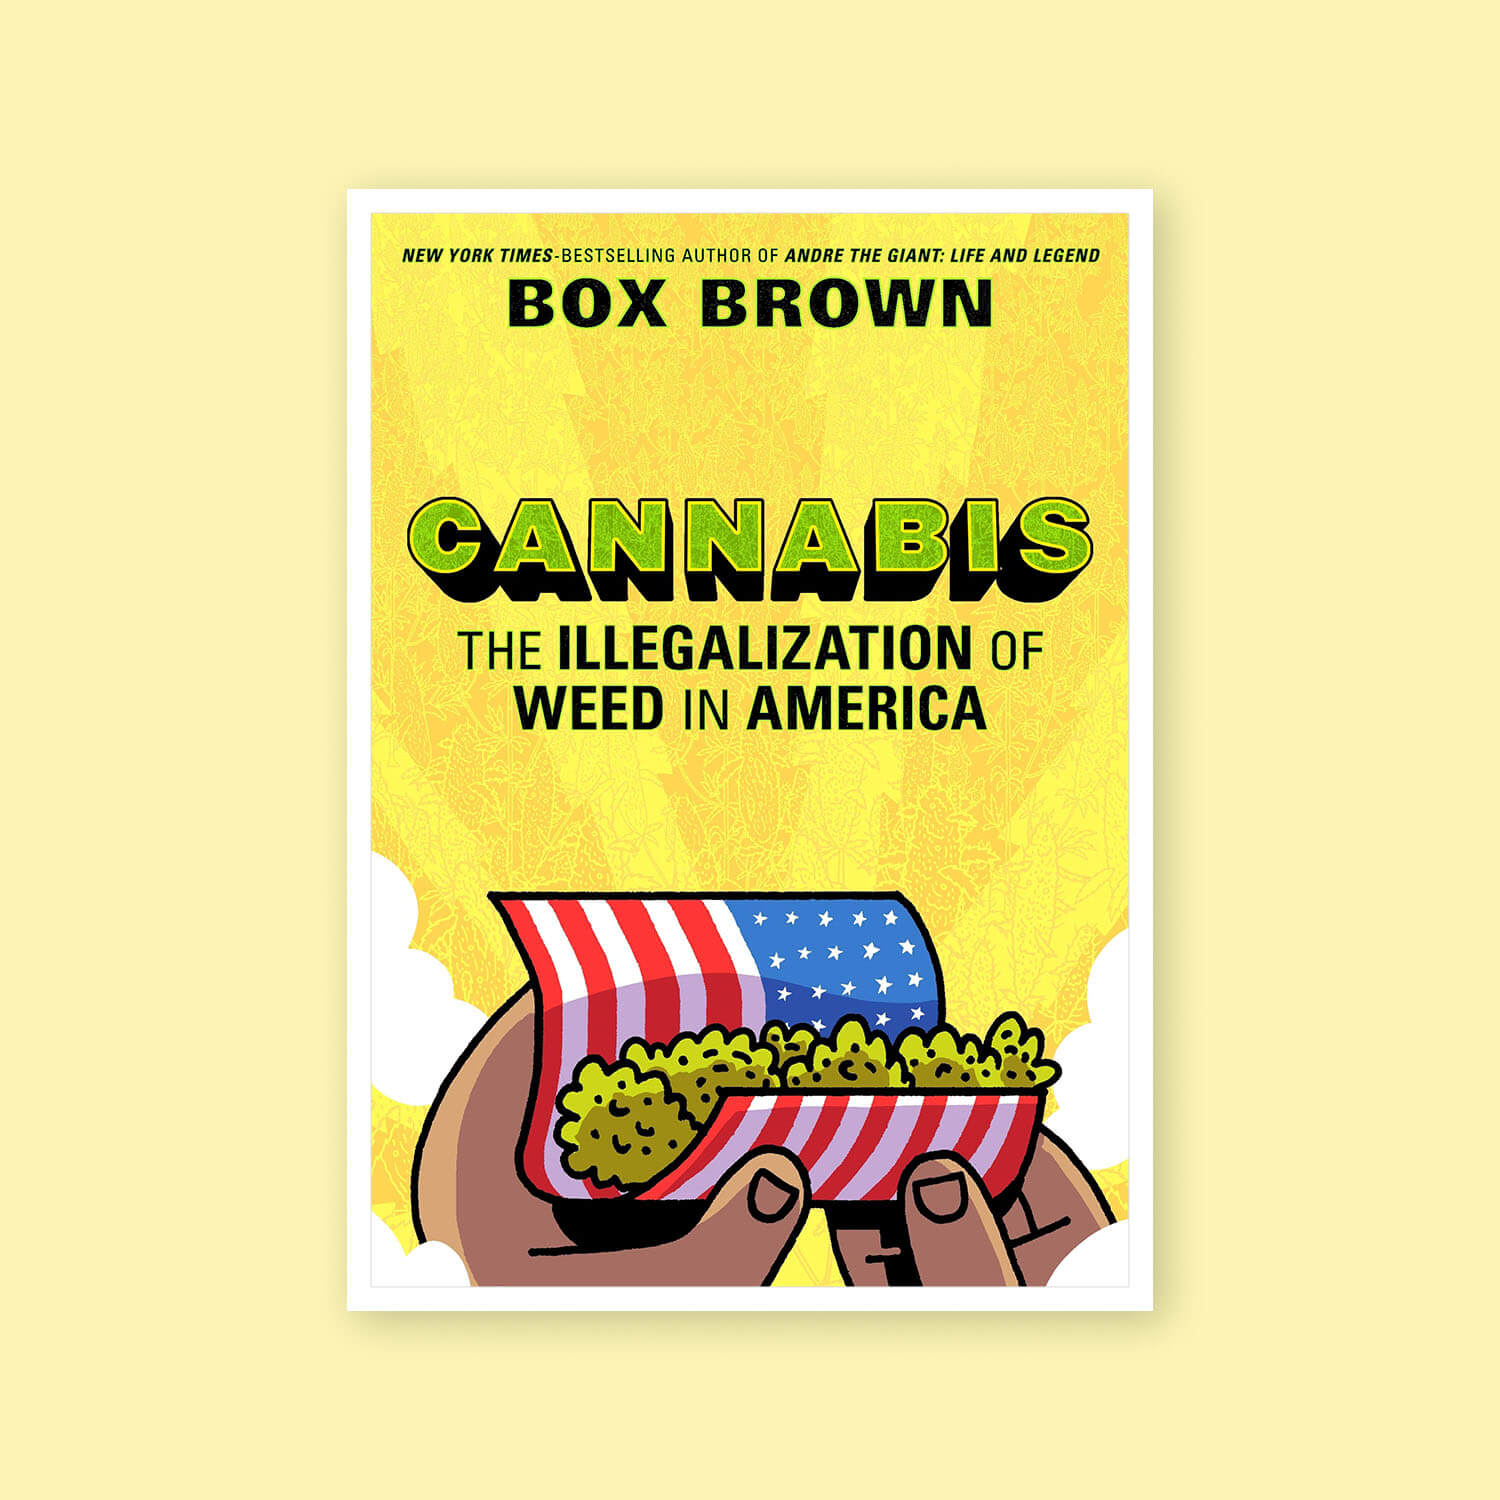 Cannabis: the illegalization of weed in america